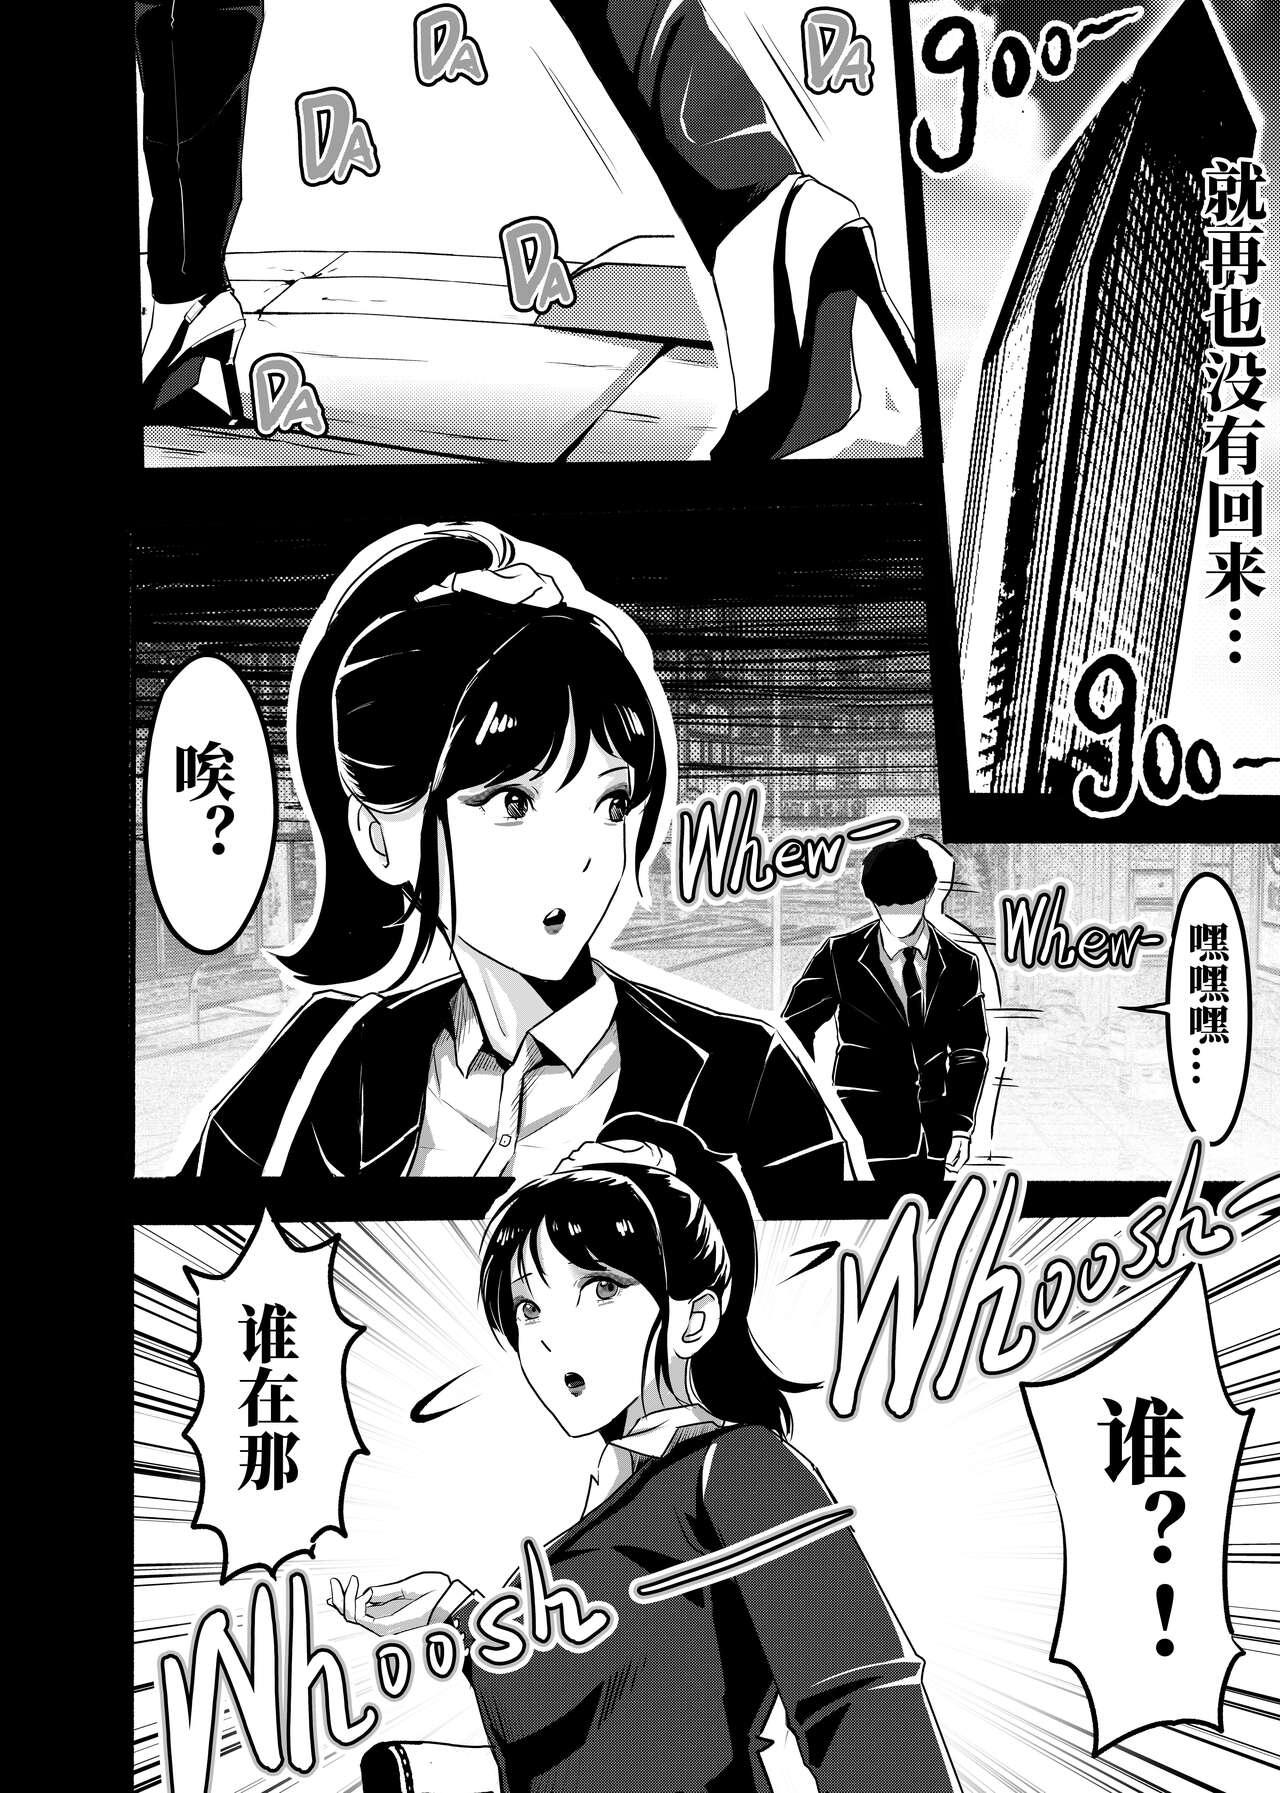 [KAO.YELLOW STUDIO (T.C.X)] I must be out of my mind to fall in love with SAORI, the Snuff Queen Ch.1-16 | 想与冰恋女王纱织同学谈恋爱的我脑子一定有问题 第1-16话 [Chinese] 221